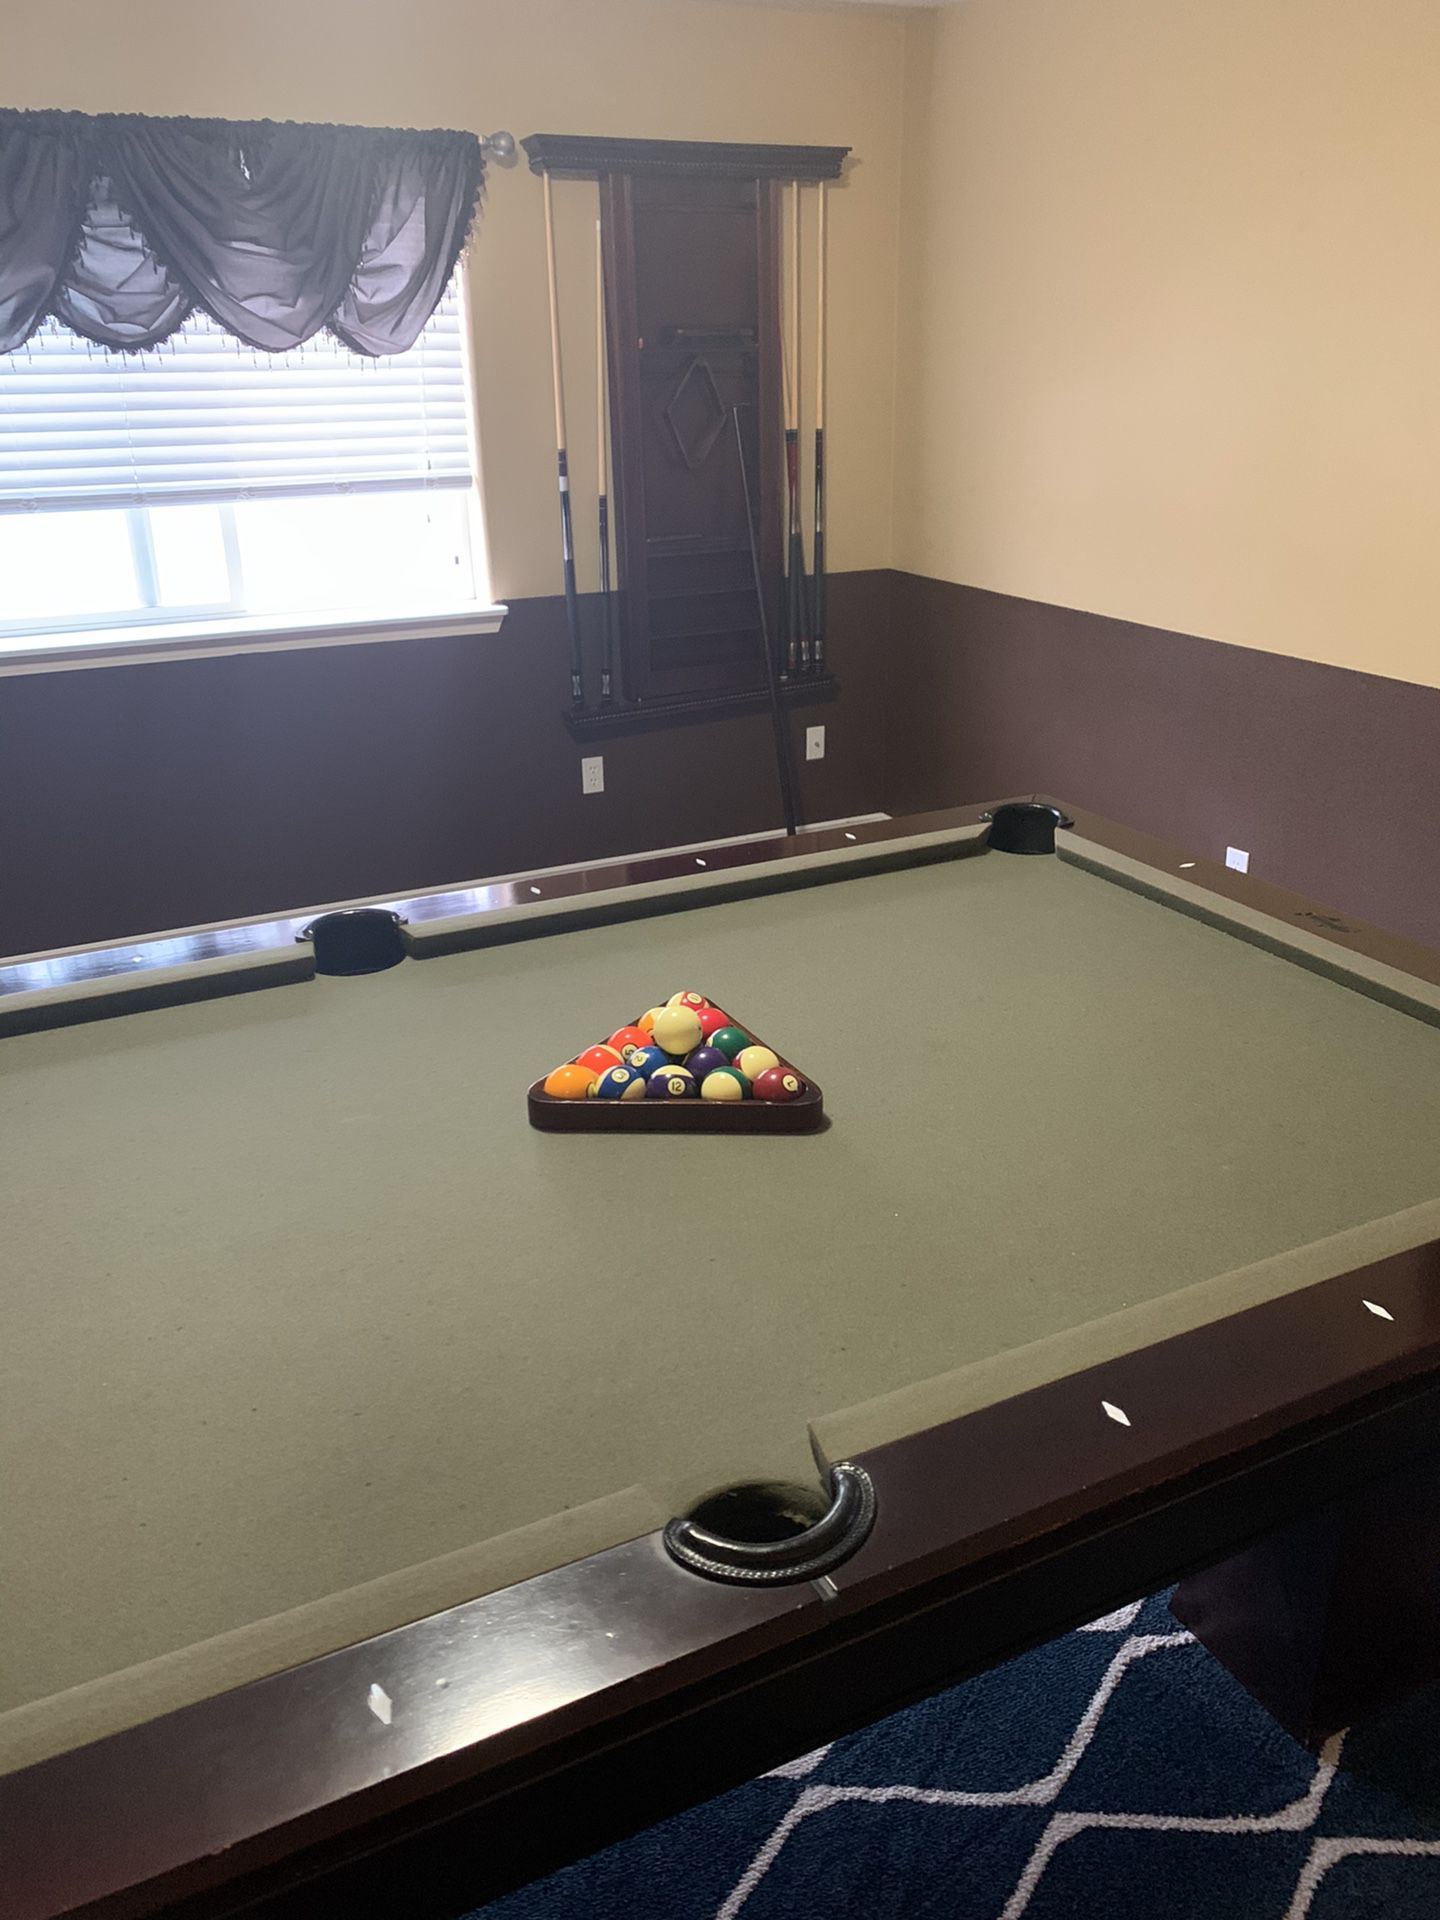 Pool table , top quality , originally $5000, today only $400. Moving sale